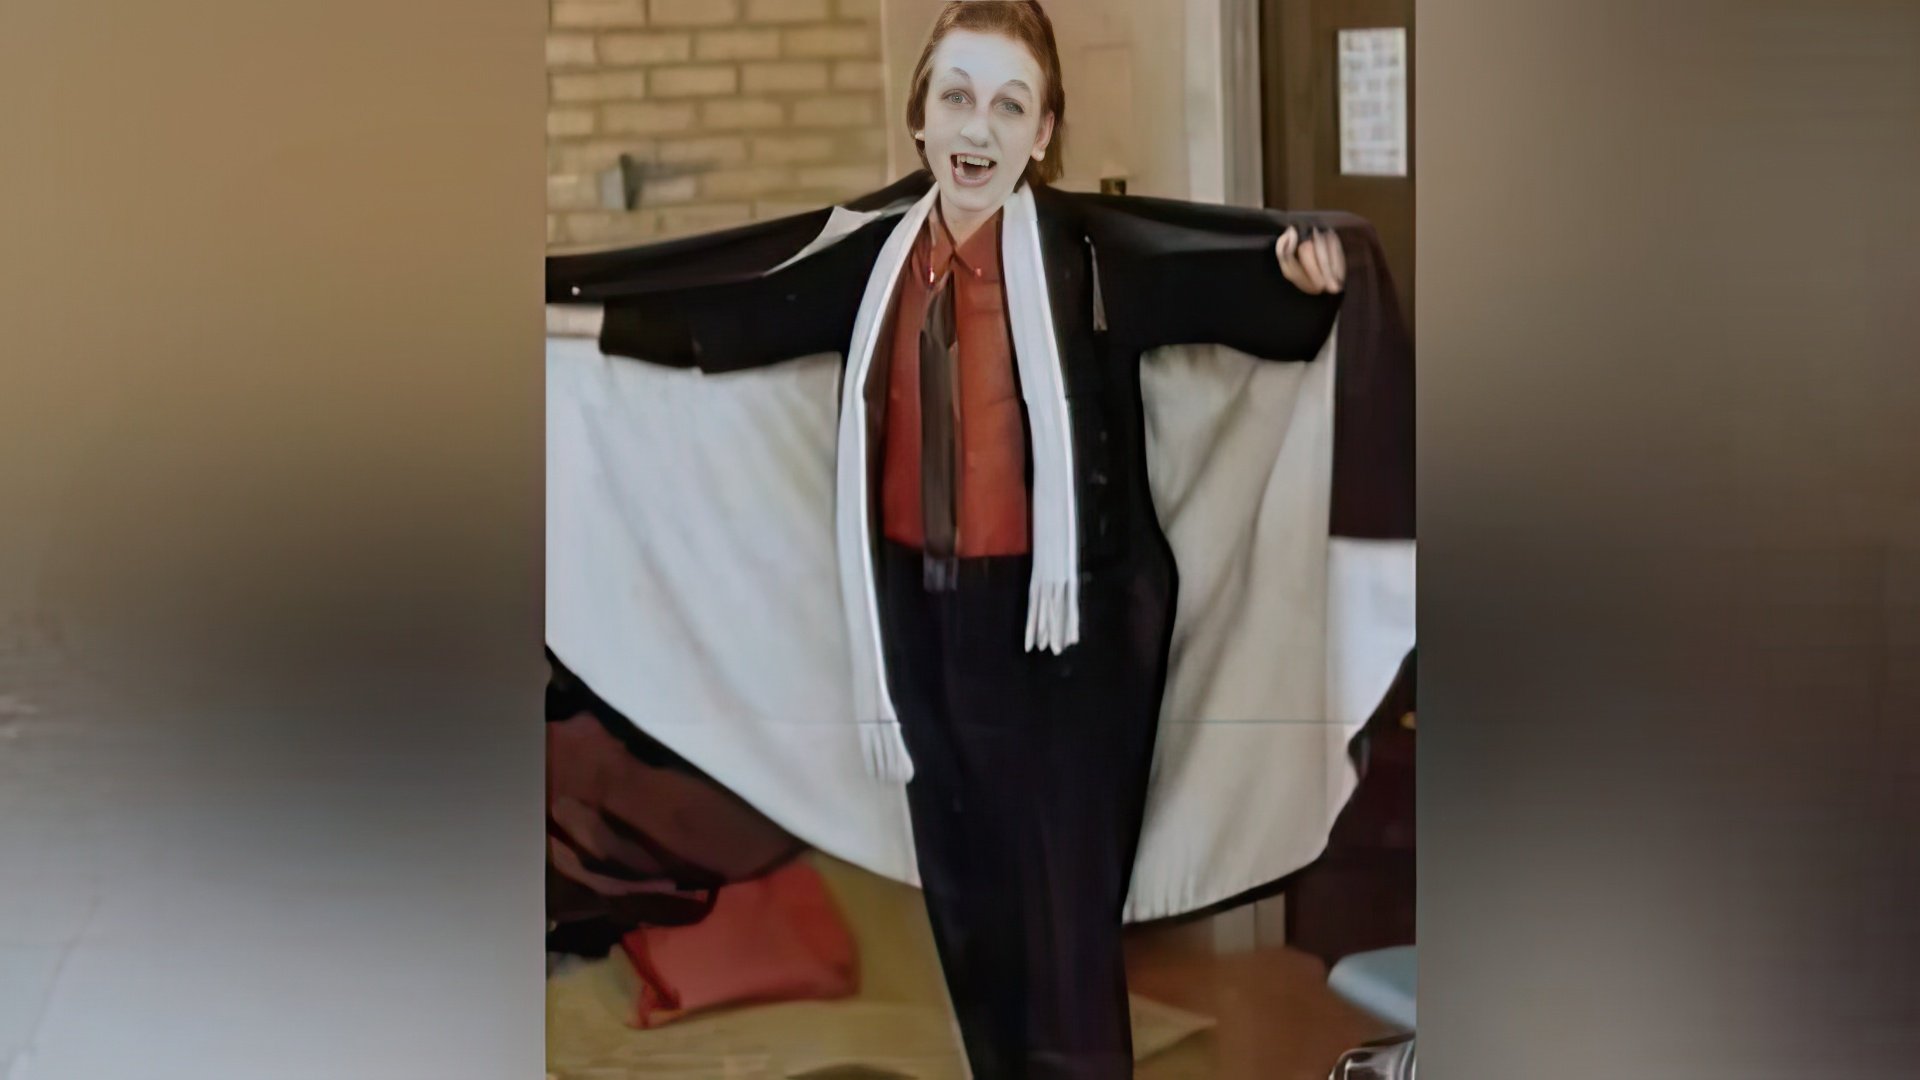 Tim Roth as a child (on the photo as Dracula in the school play)